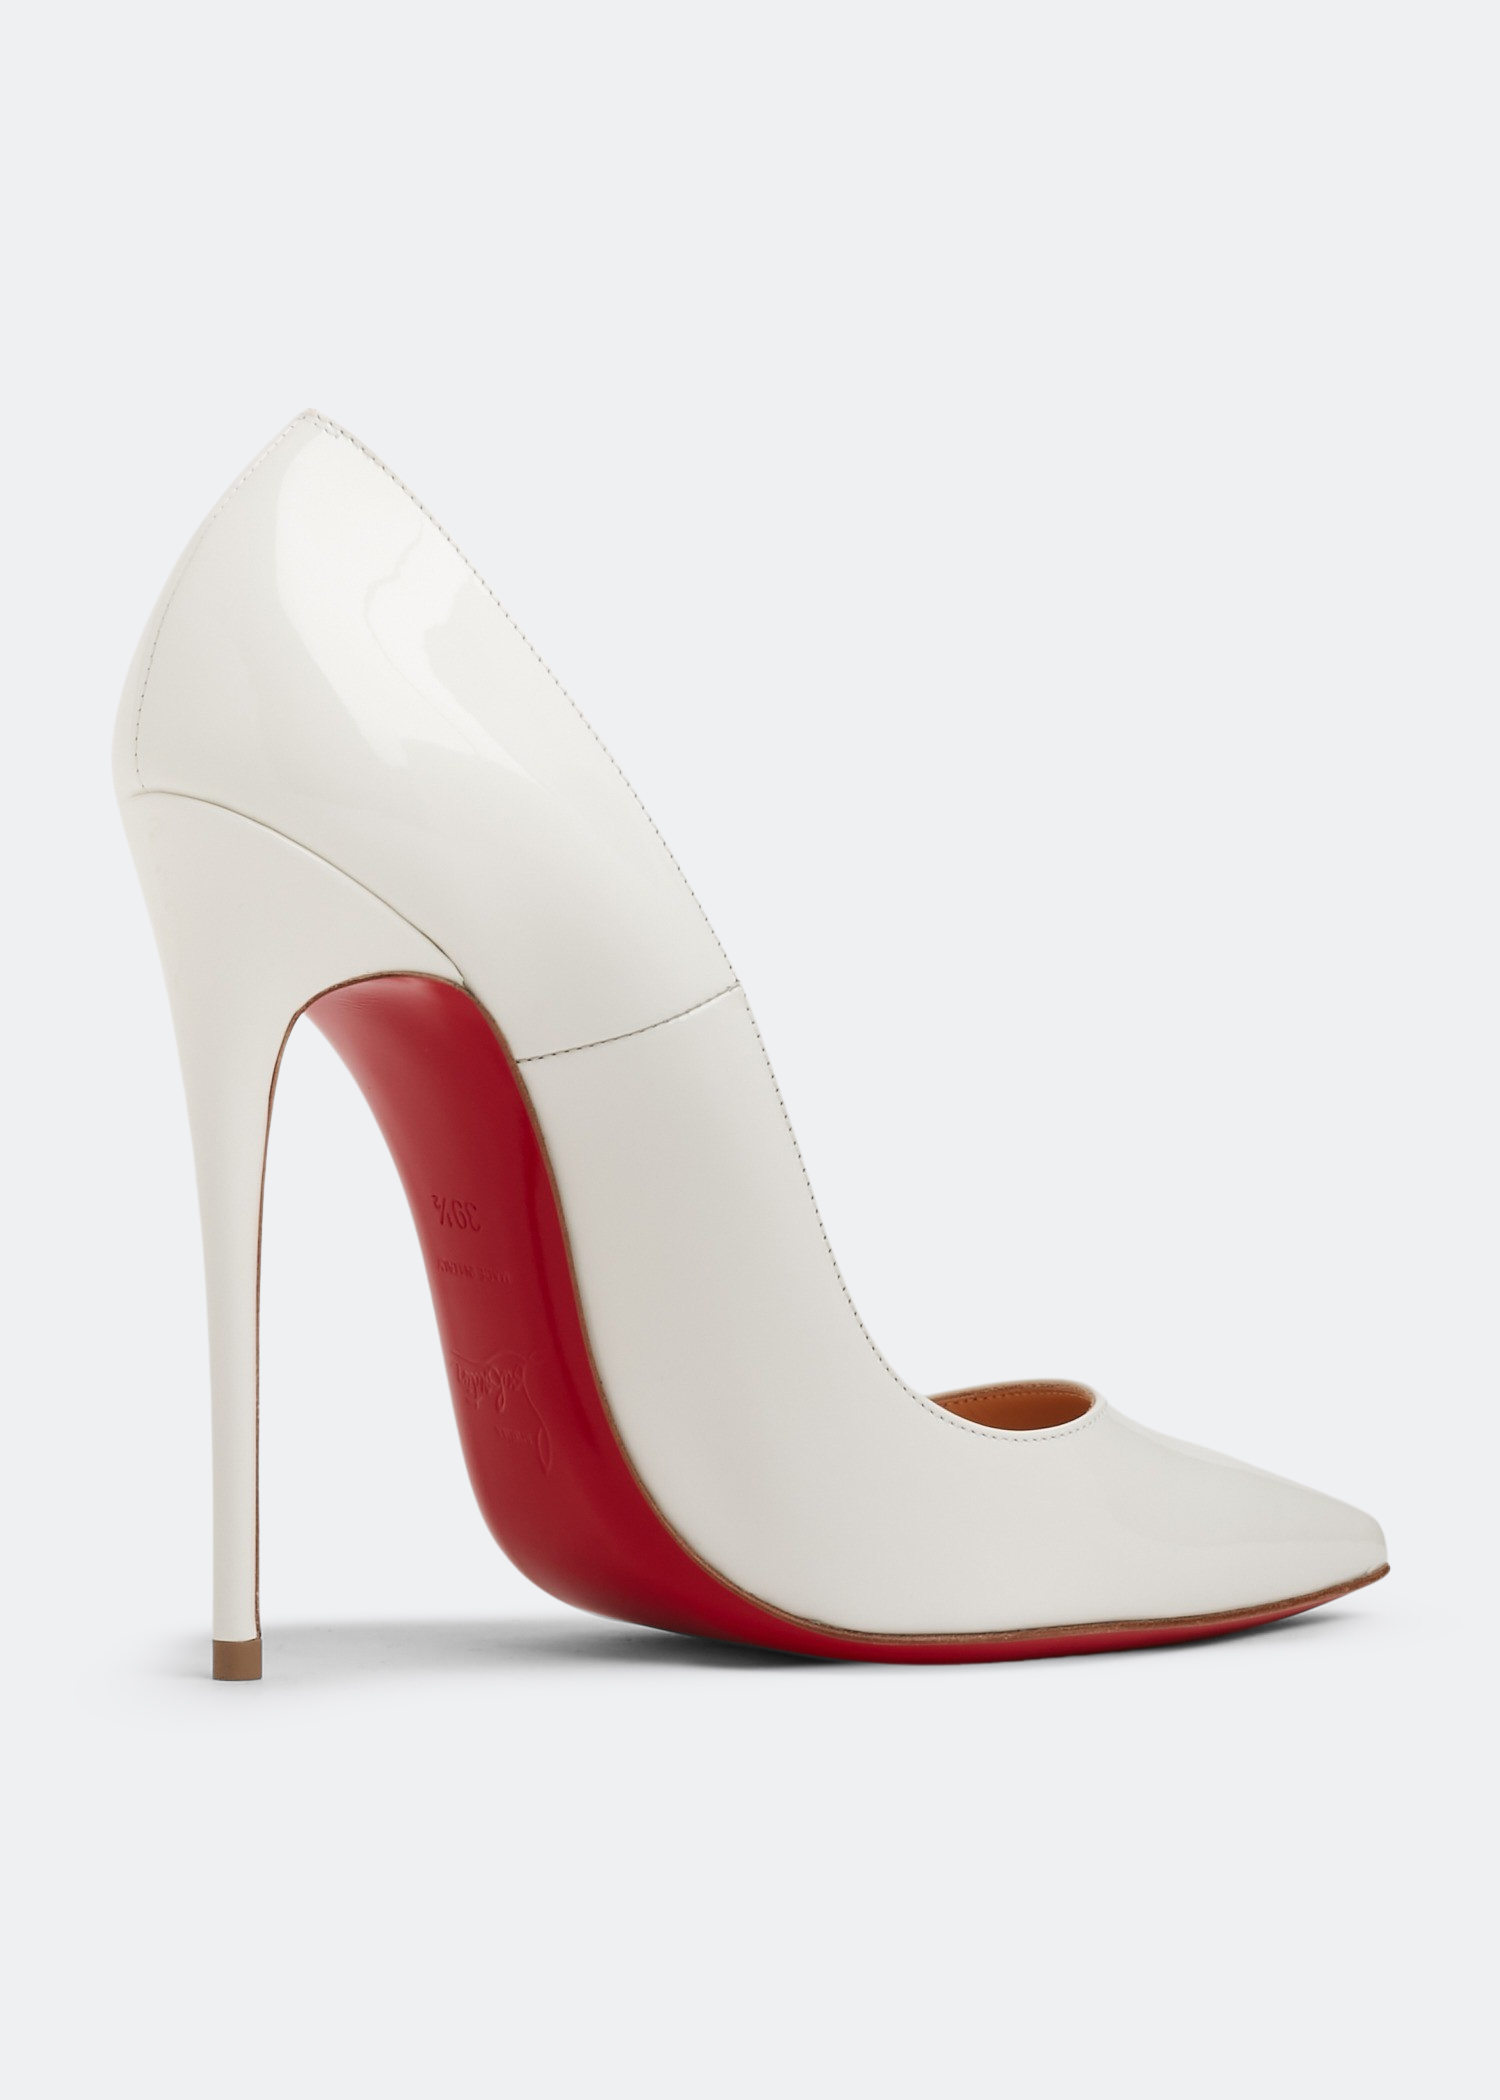 Christian Louboutin So Kate 120 pumps for Women - White in